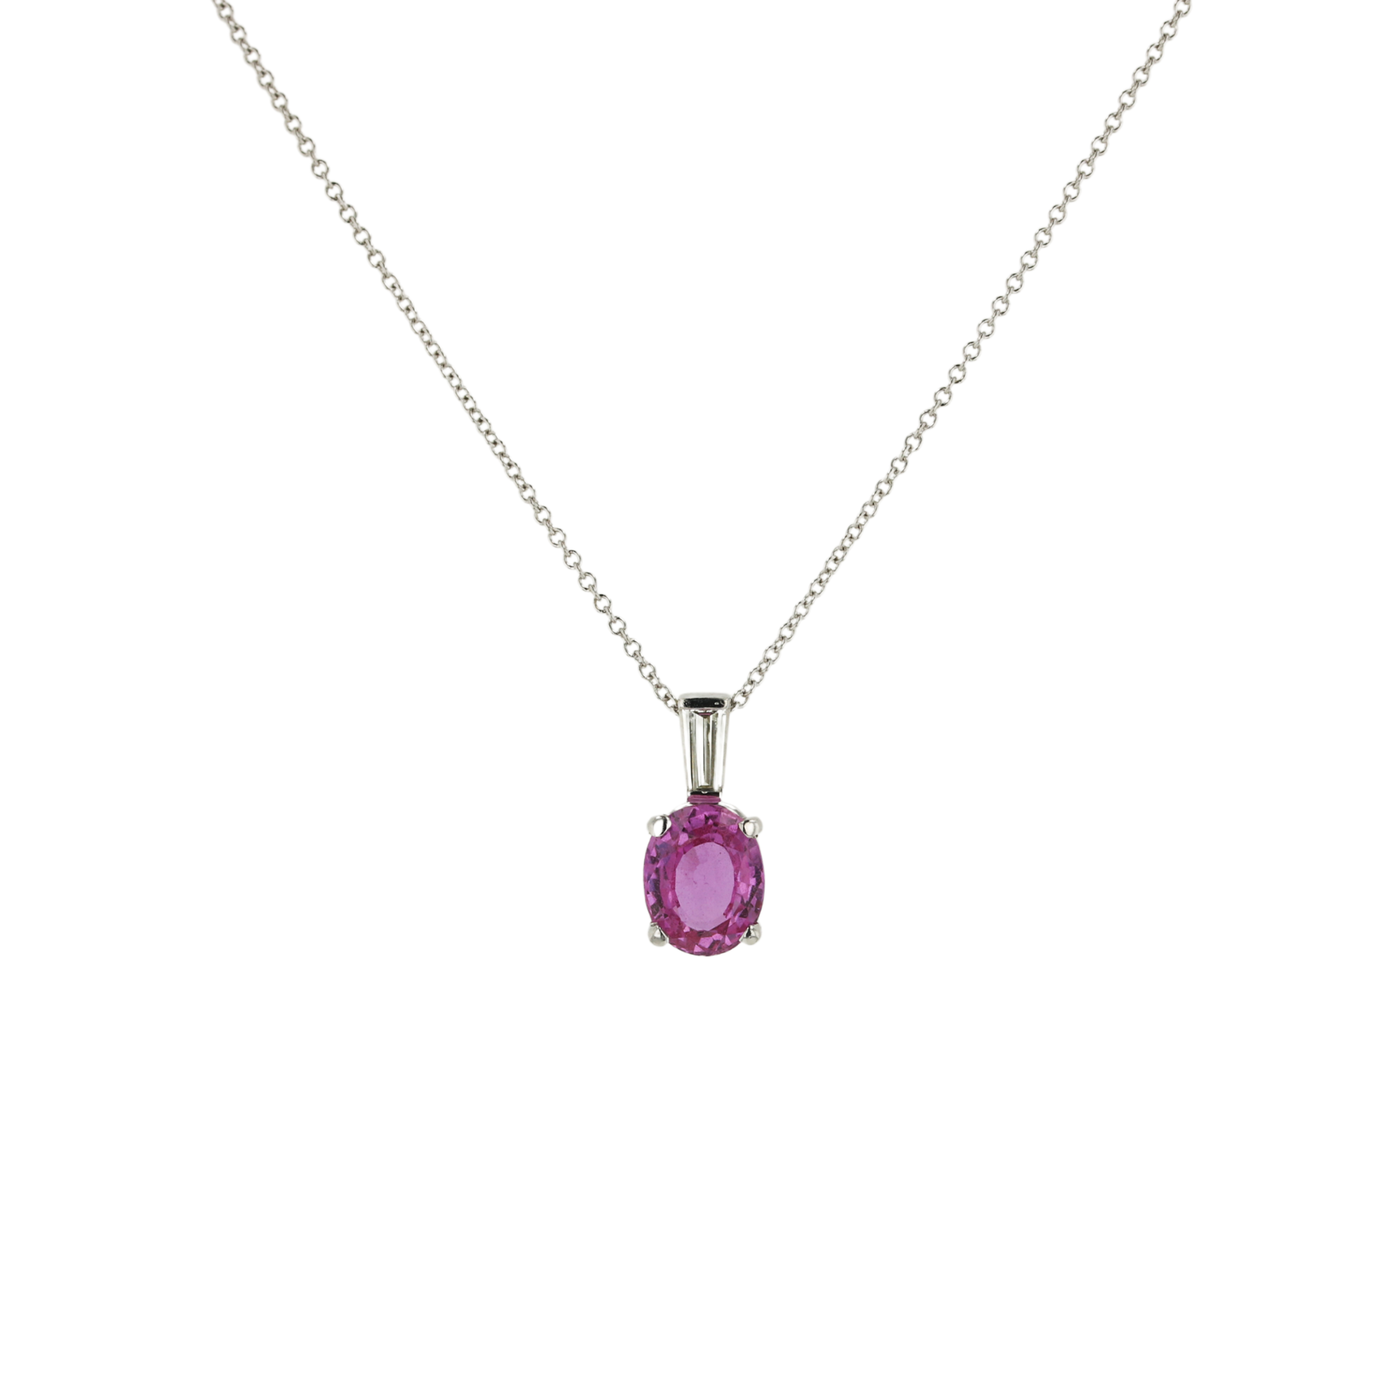 "PinkBloom" 1.0 CTW Oval Pink Sapphire Necklace in 14K White Gold